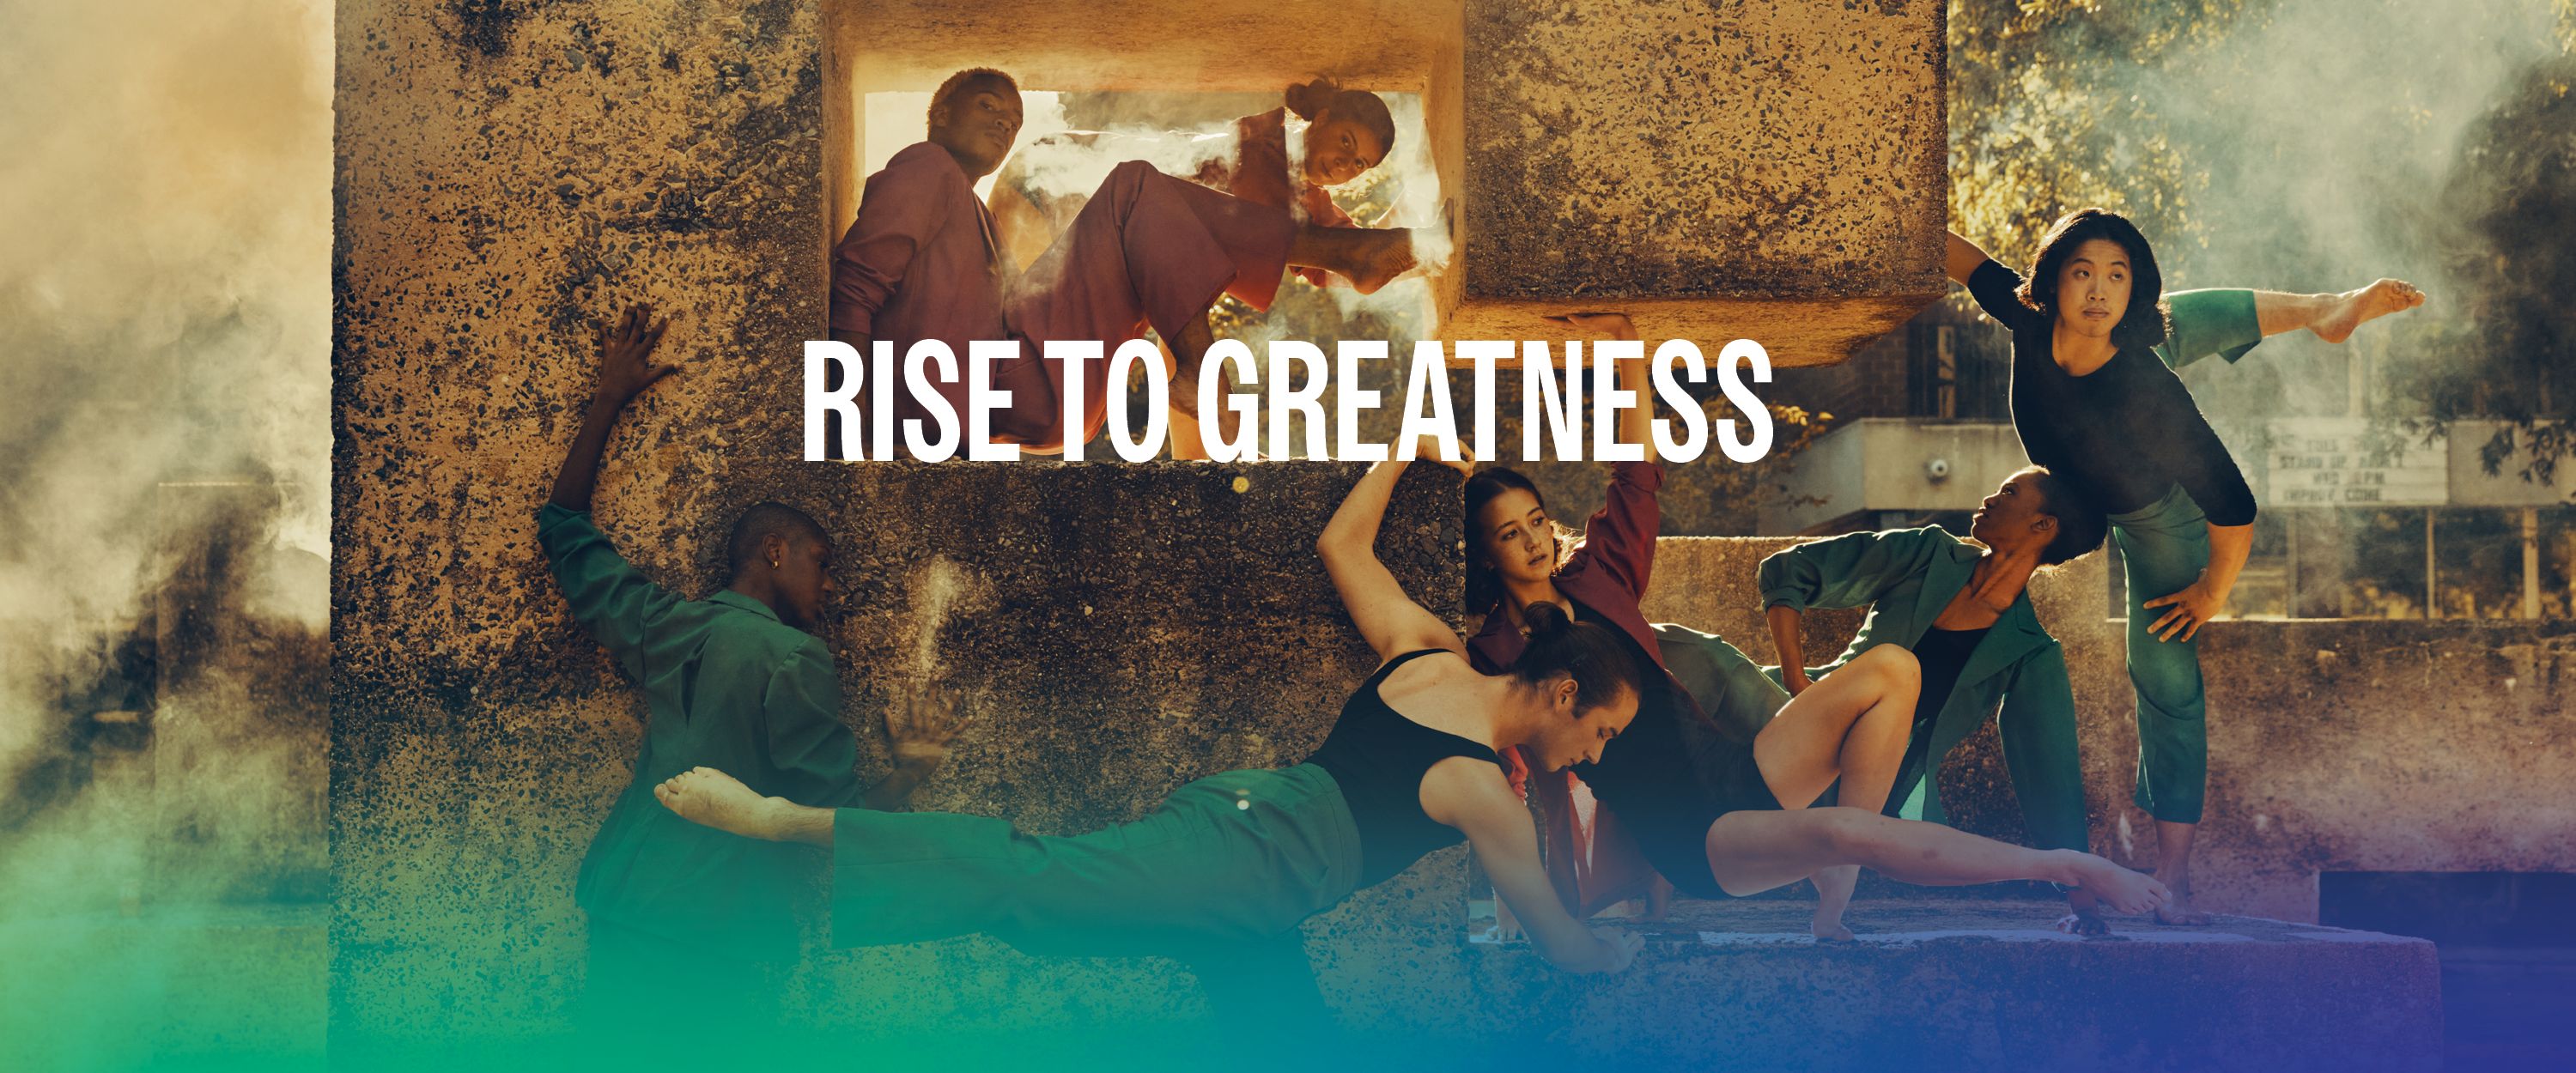 UNCSA dance students performing on campus with Rise to Greatness text overlaying the image